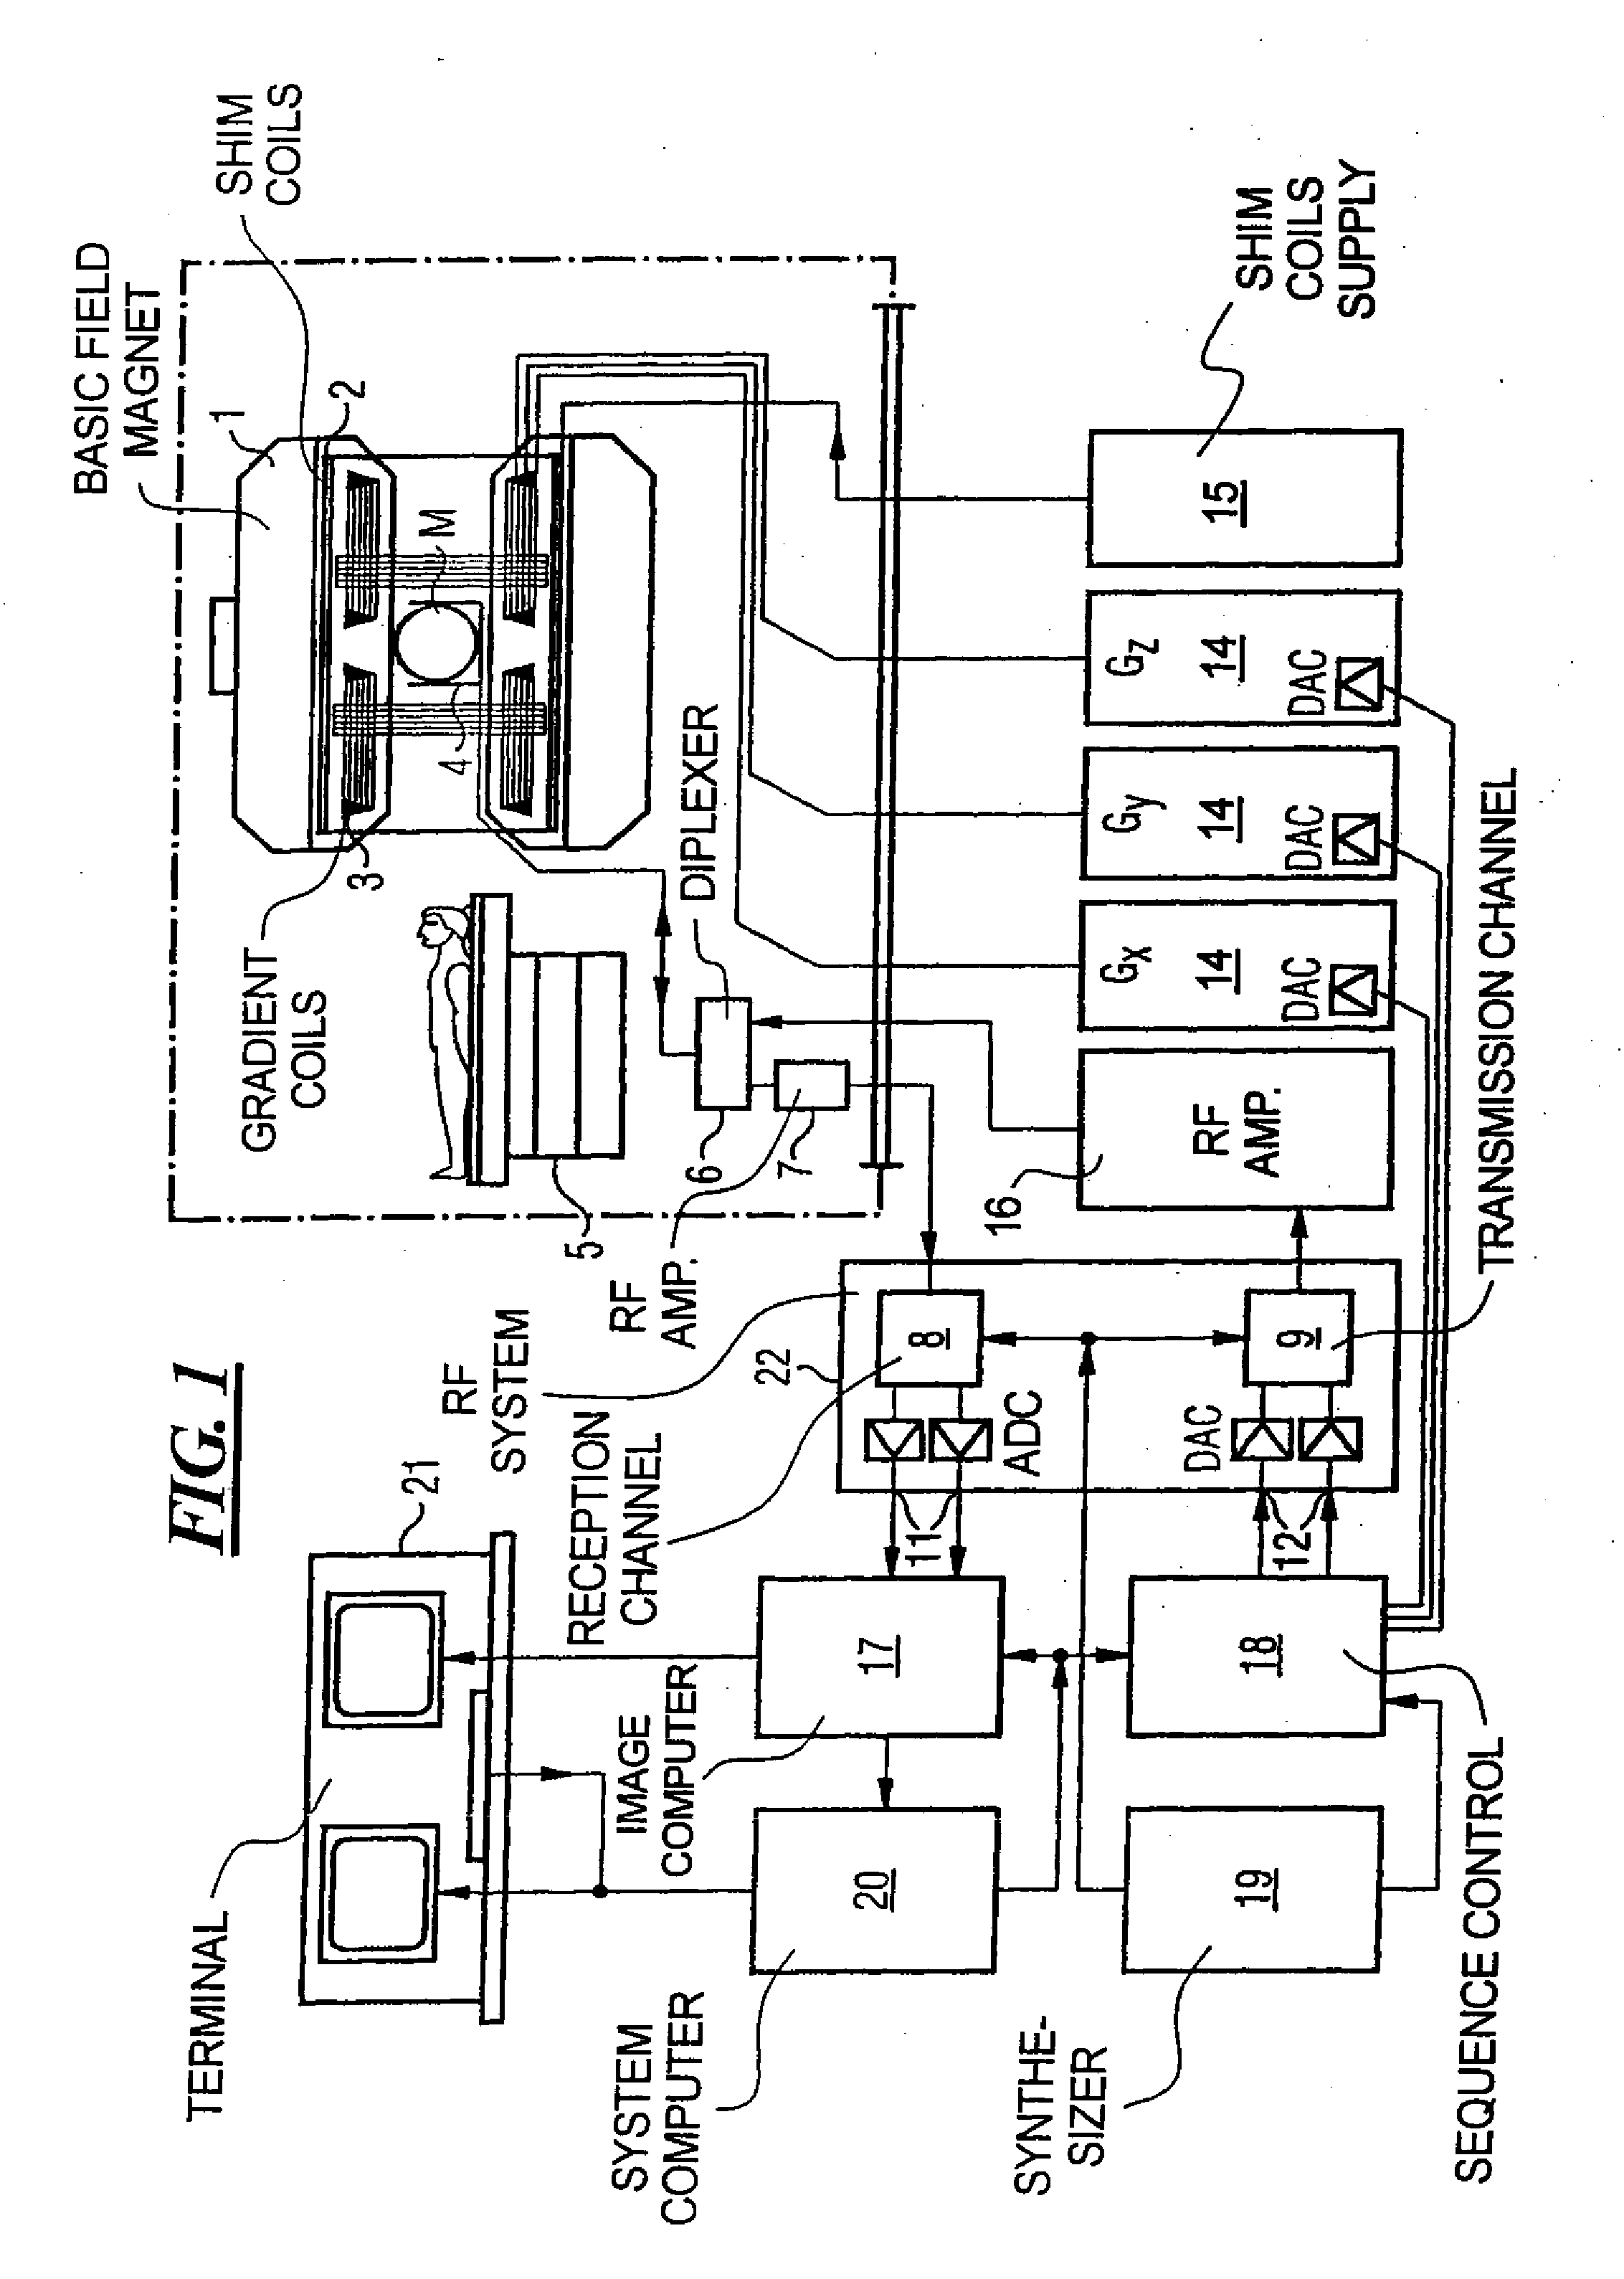 Multiply phase-cycled steady state free precession sequence and magnetic resonance apparatus for implementation thereof